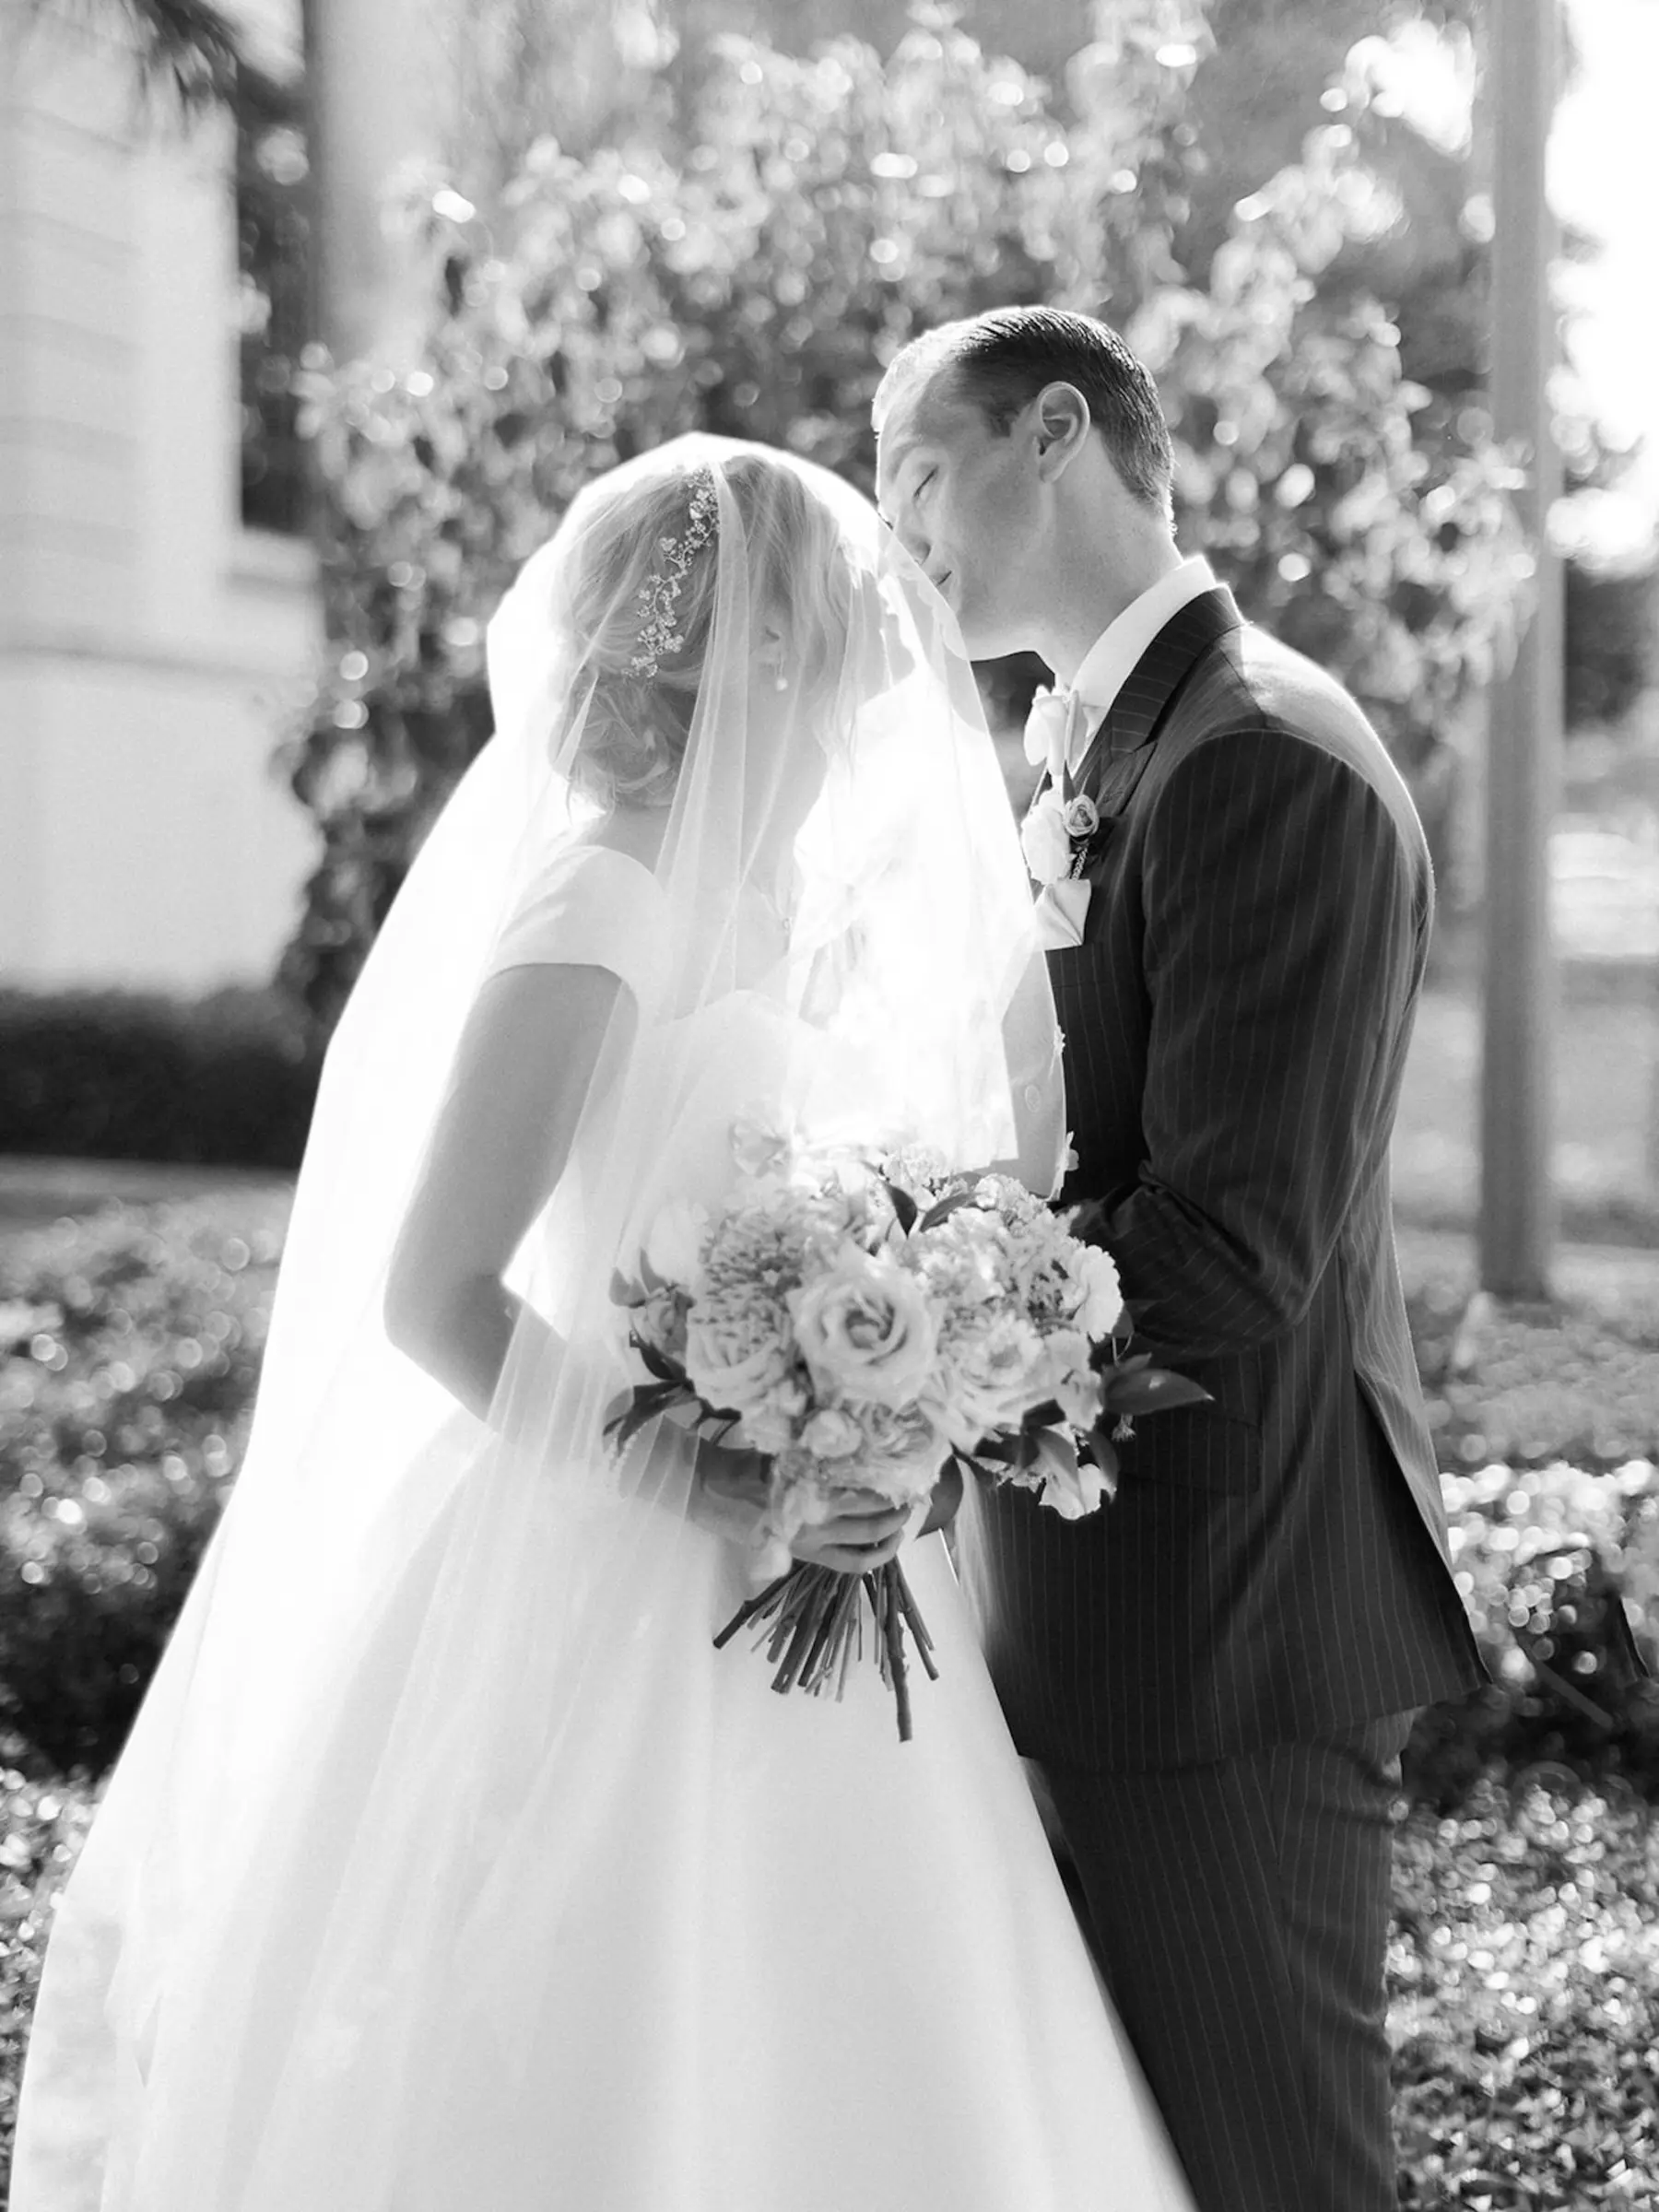 Bride and Groom Just Married Black and White Wedding Portrait | Tampa Bay Planner Unique Weddings and Events